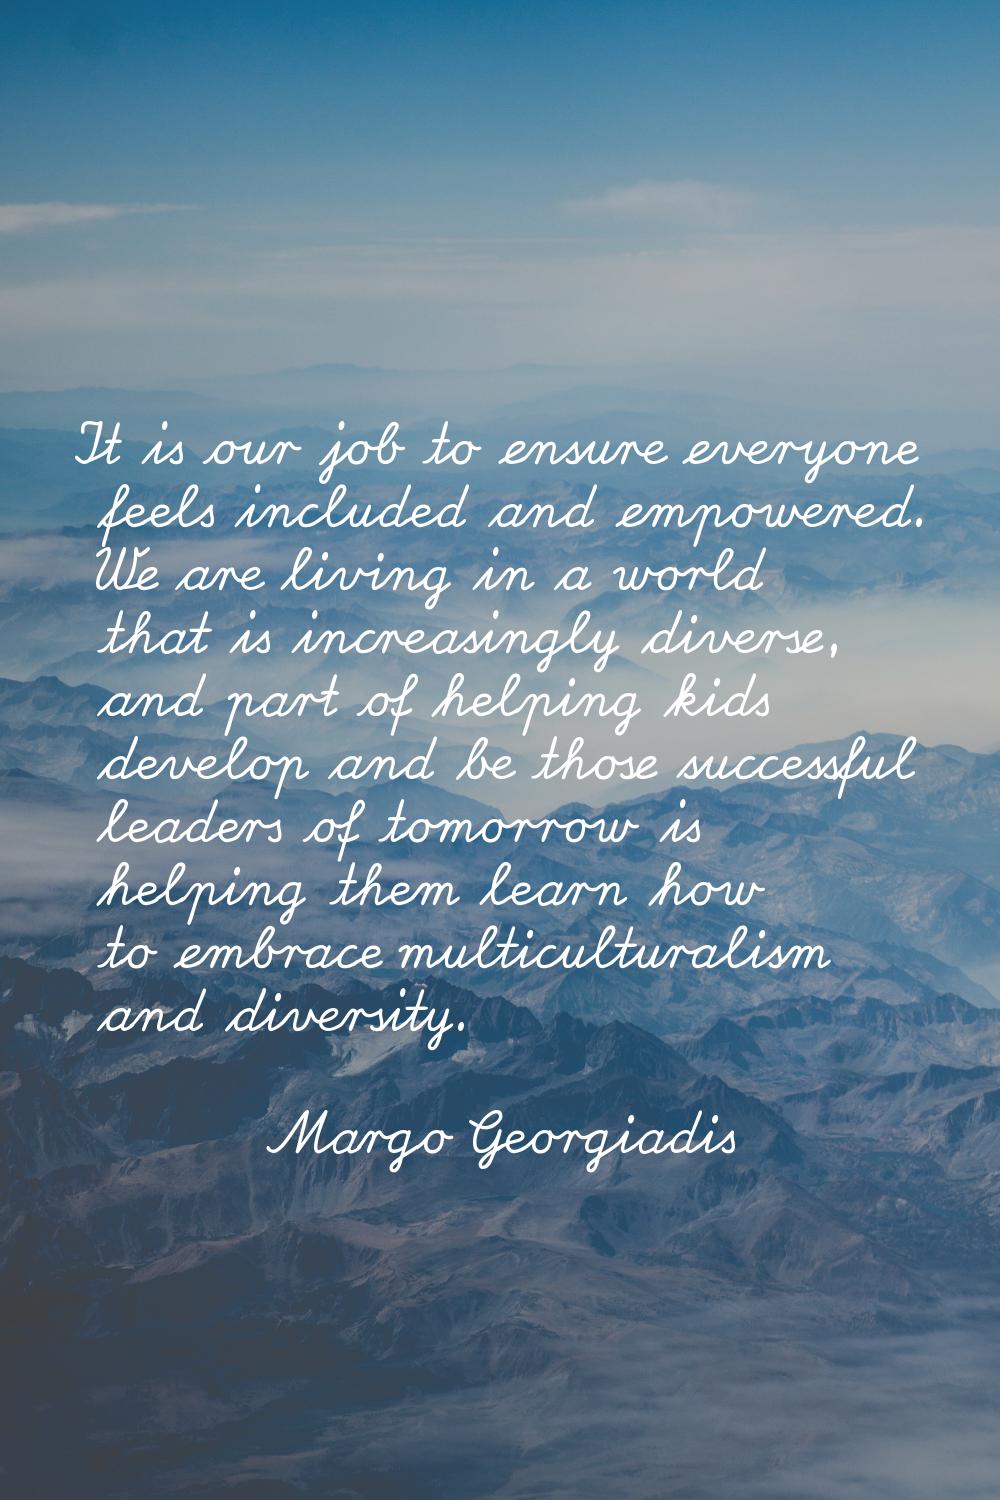 It is our job to ensure everyone feels included and empowered. We are living in a world that is inc